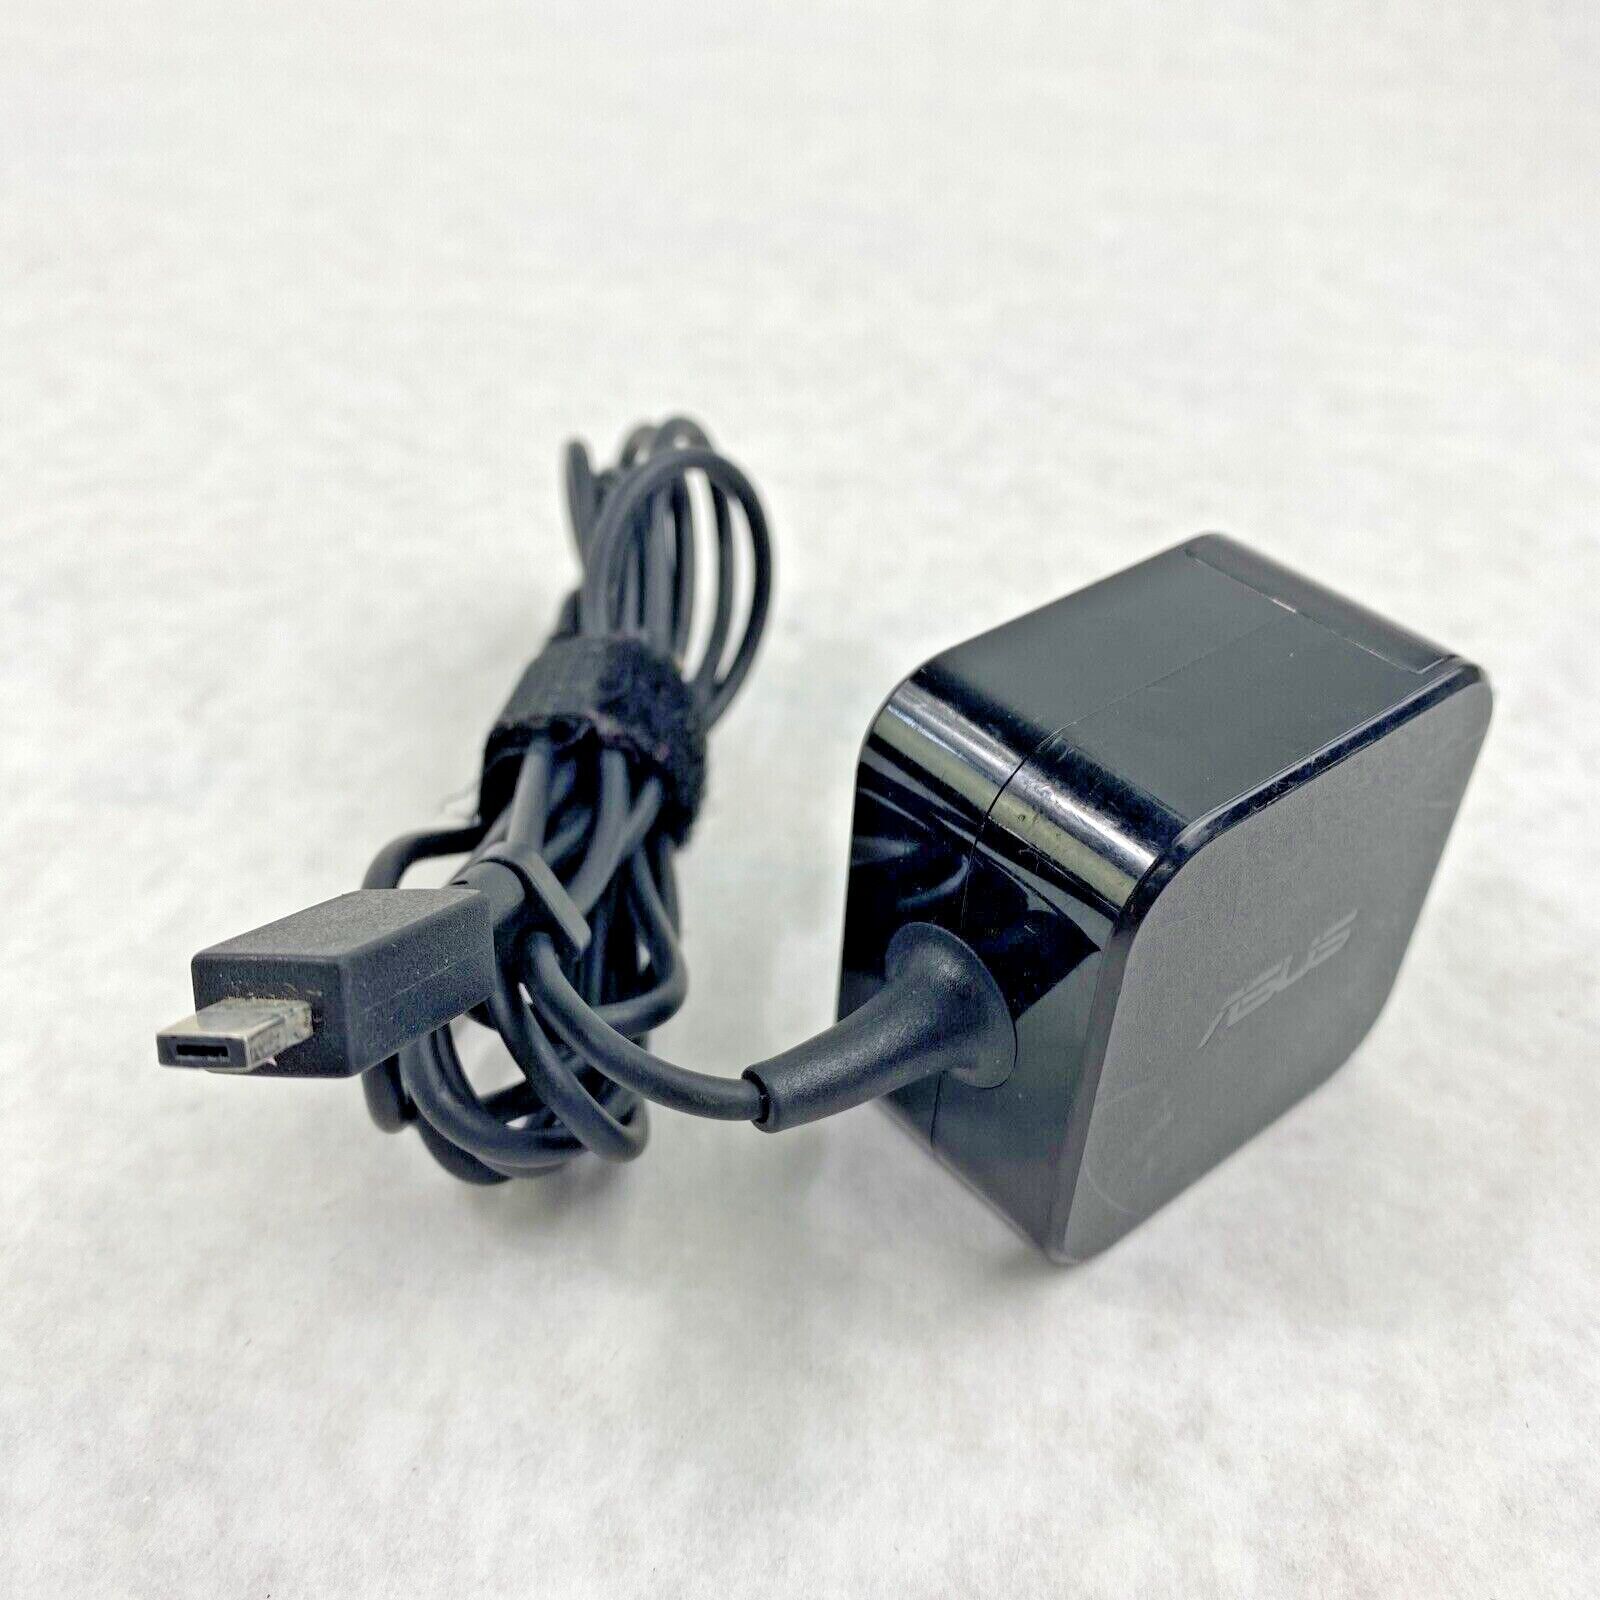 Lot of 5 Asus ADP-24EW B Genuine 24W 12V 2A Square Connector AC Adapter PSU OEM